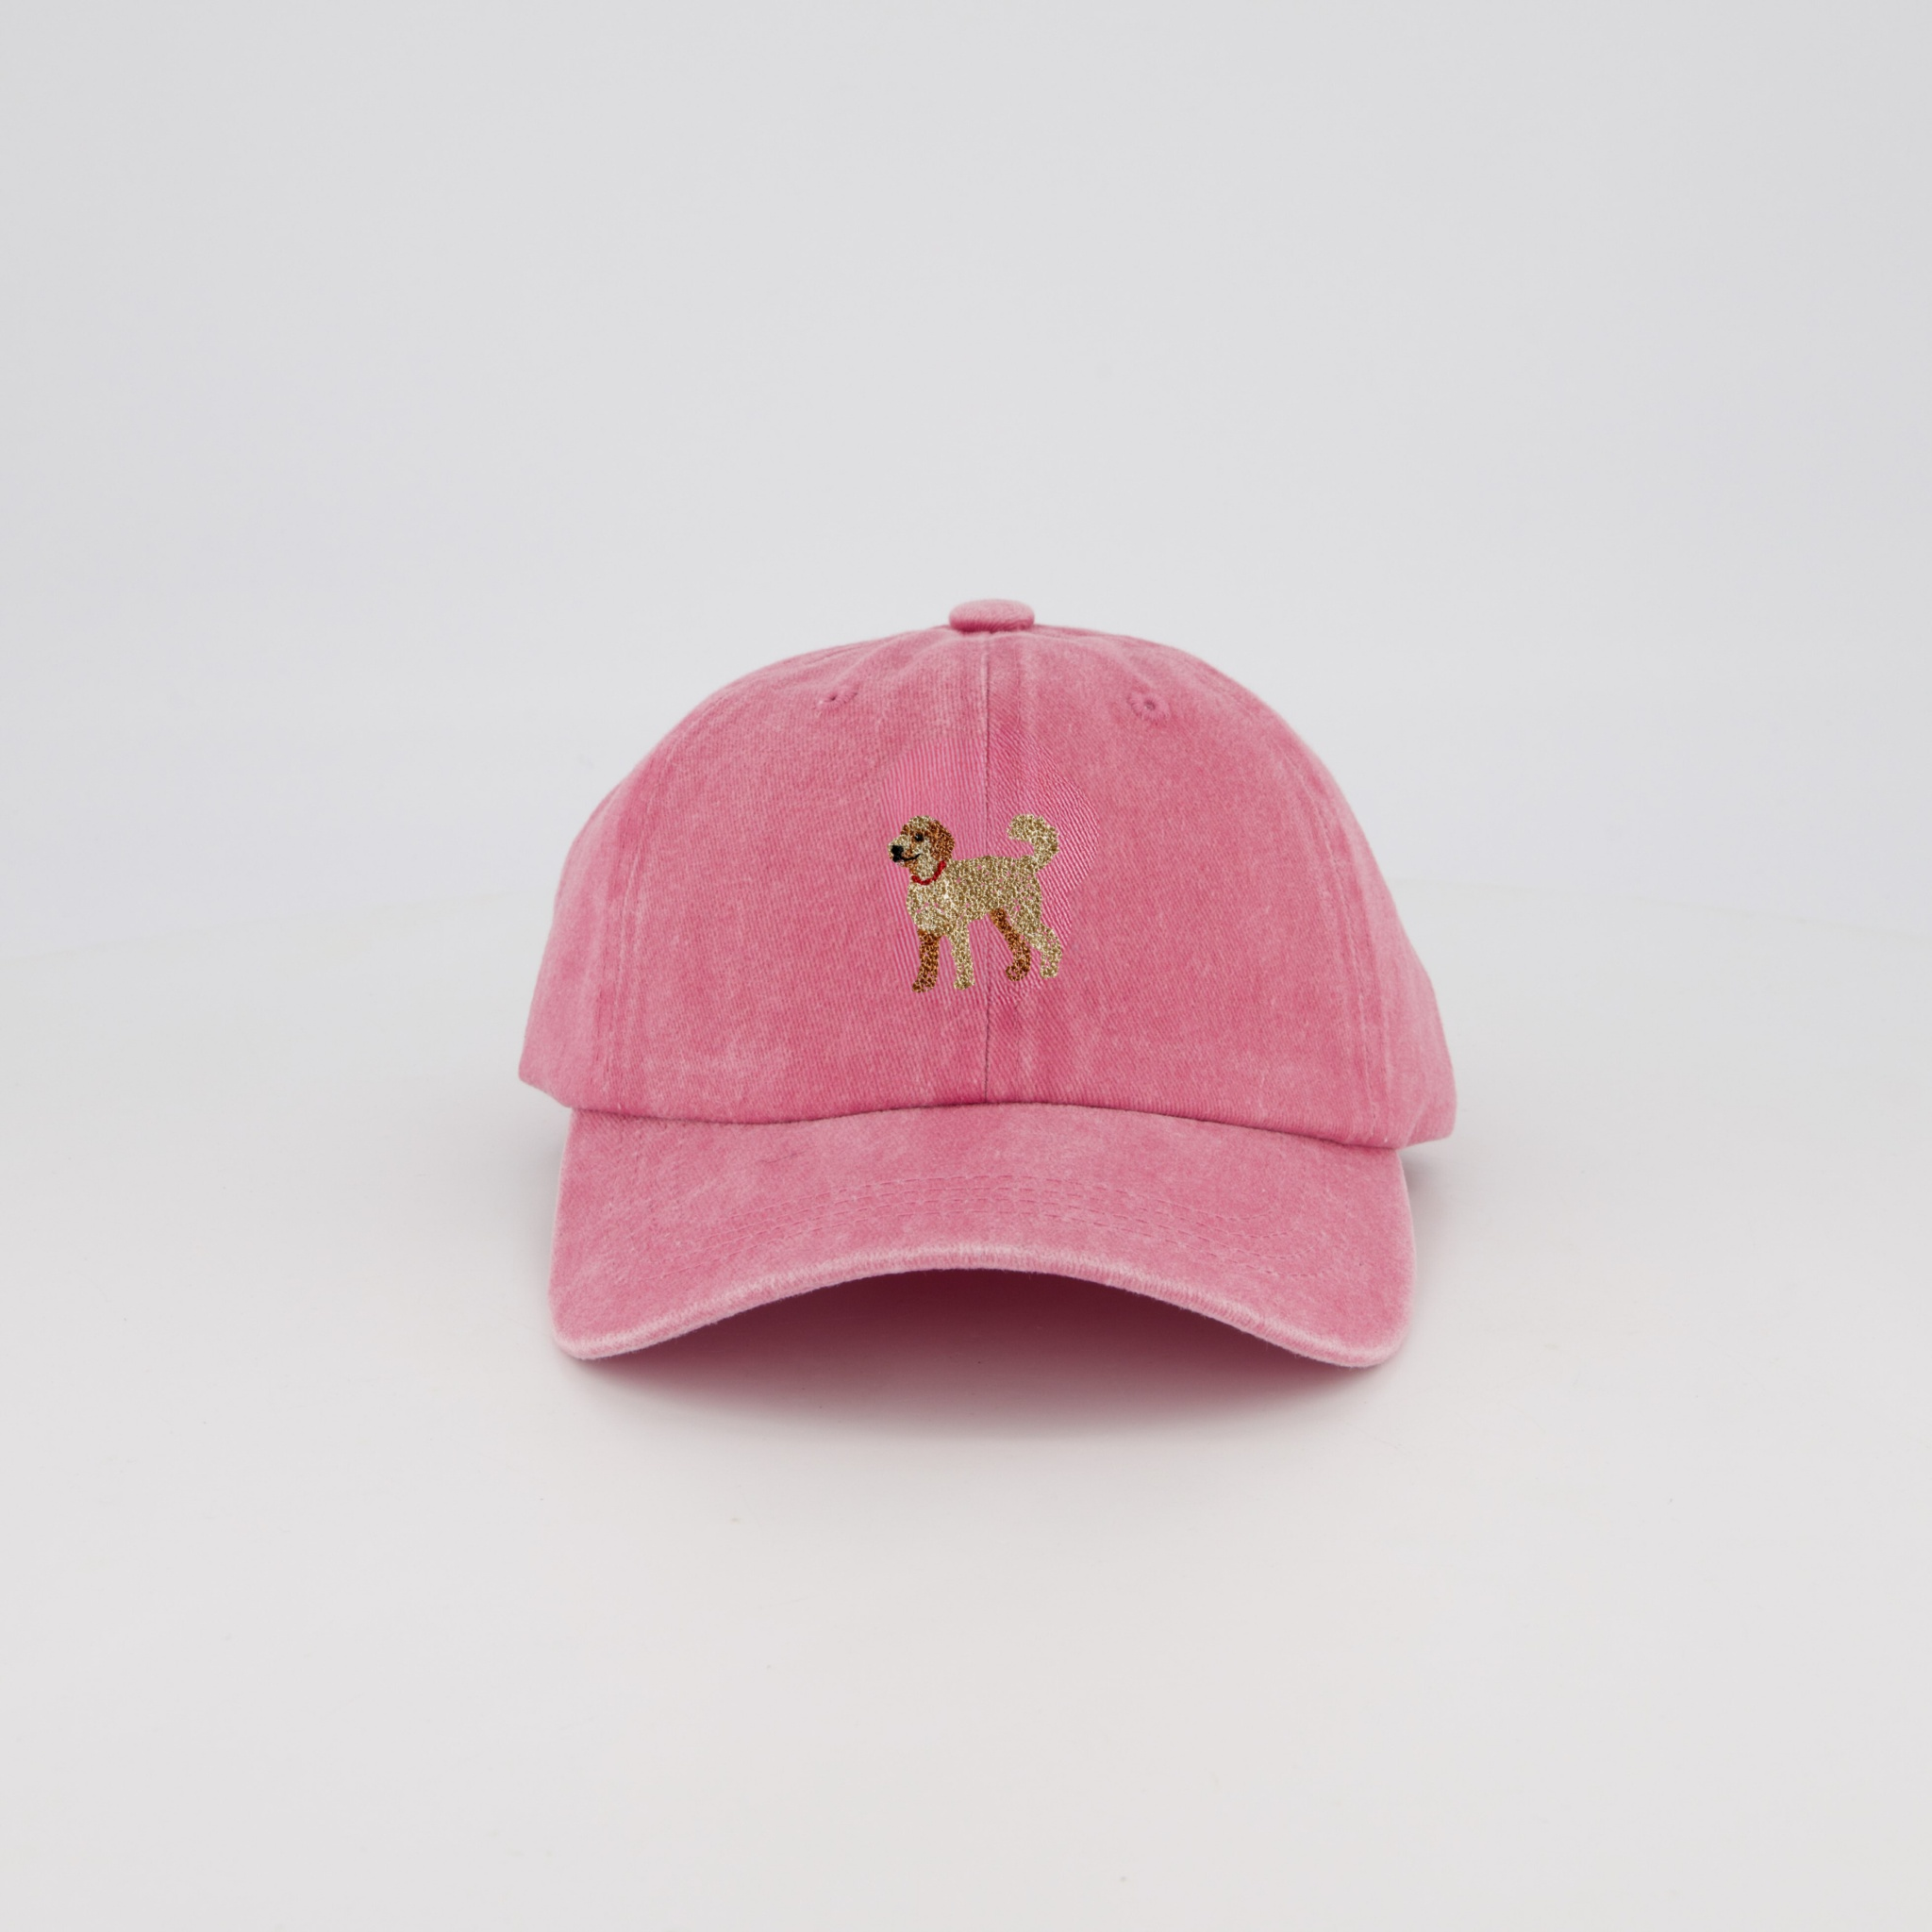 Vintage Pink Personalised Hat with Hand-drawn Labradoodle Embroidery Design 